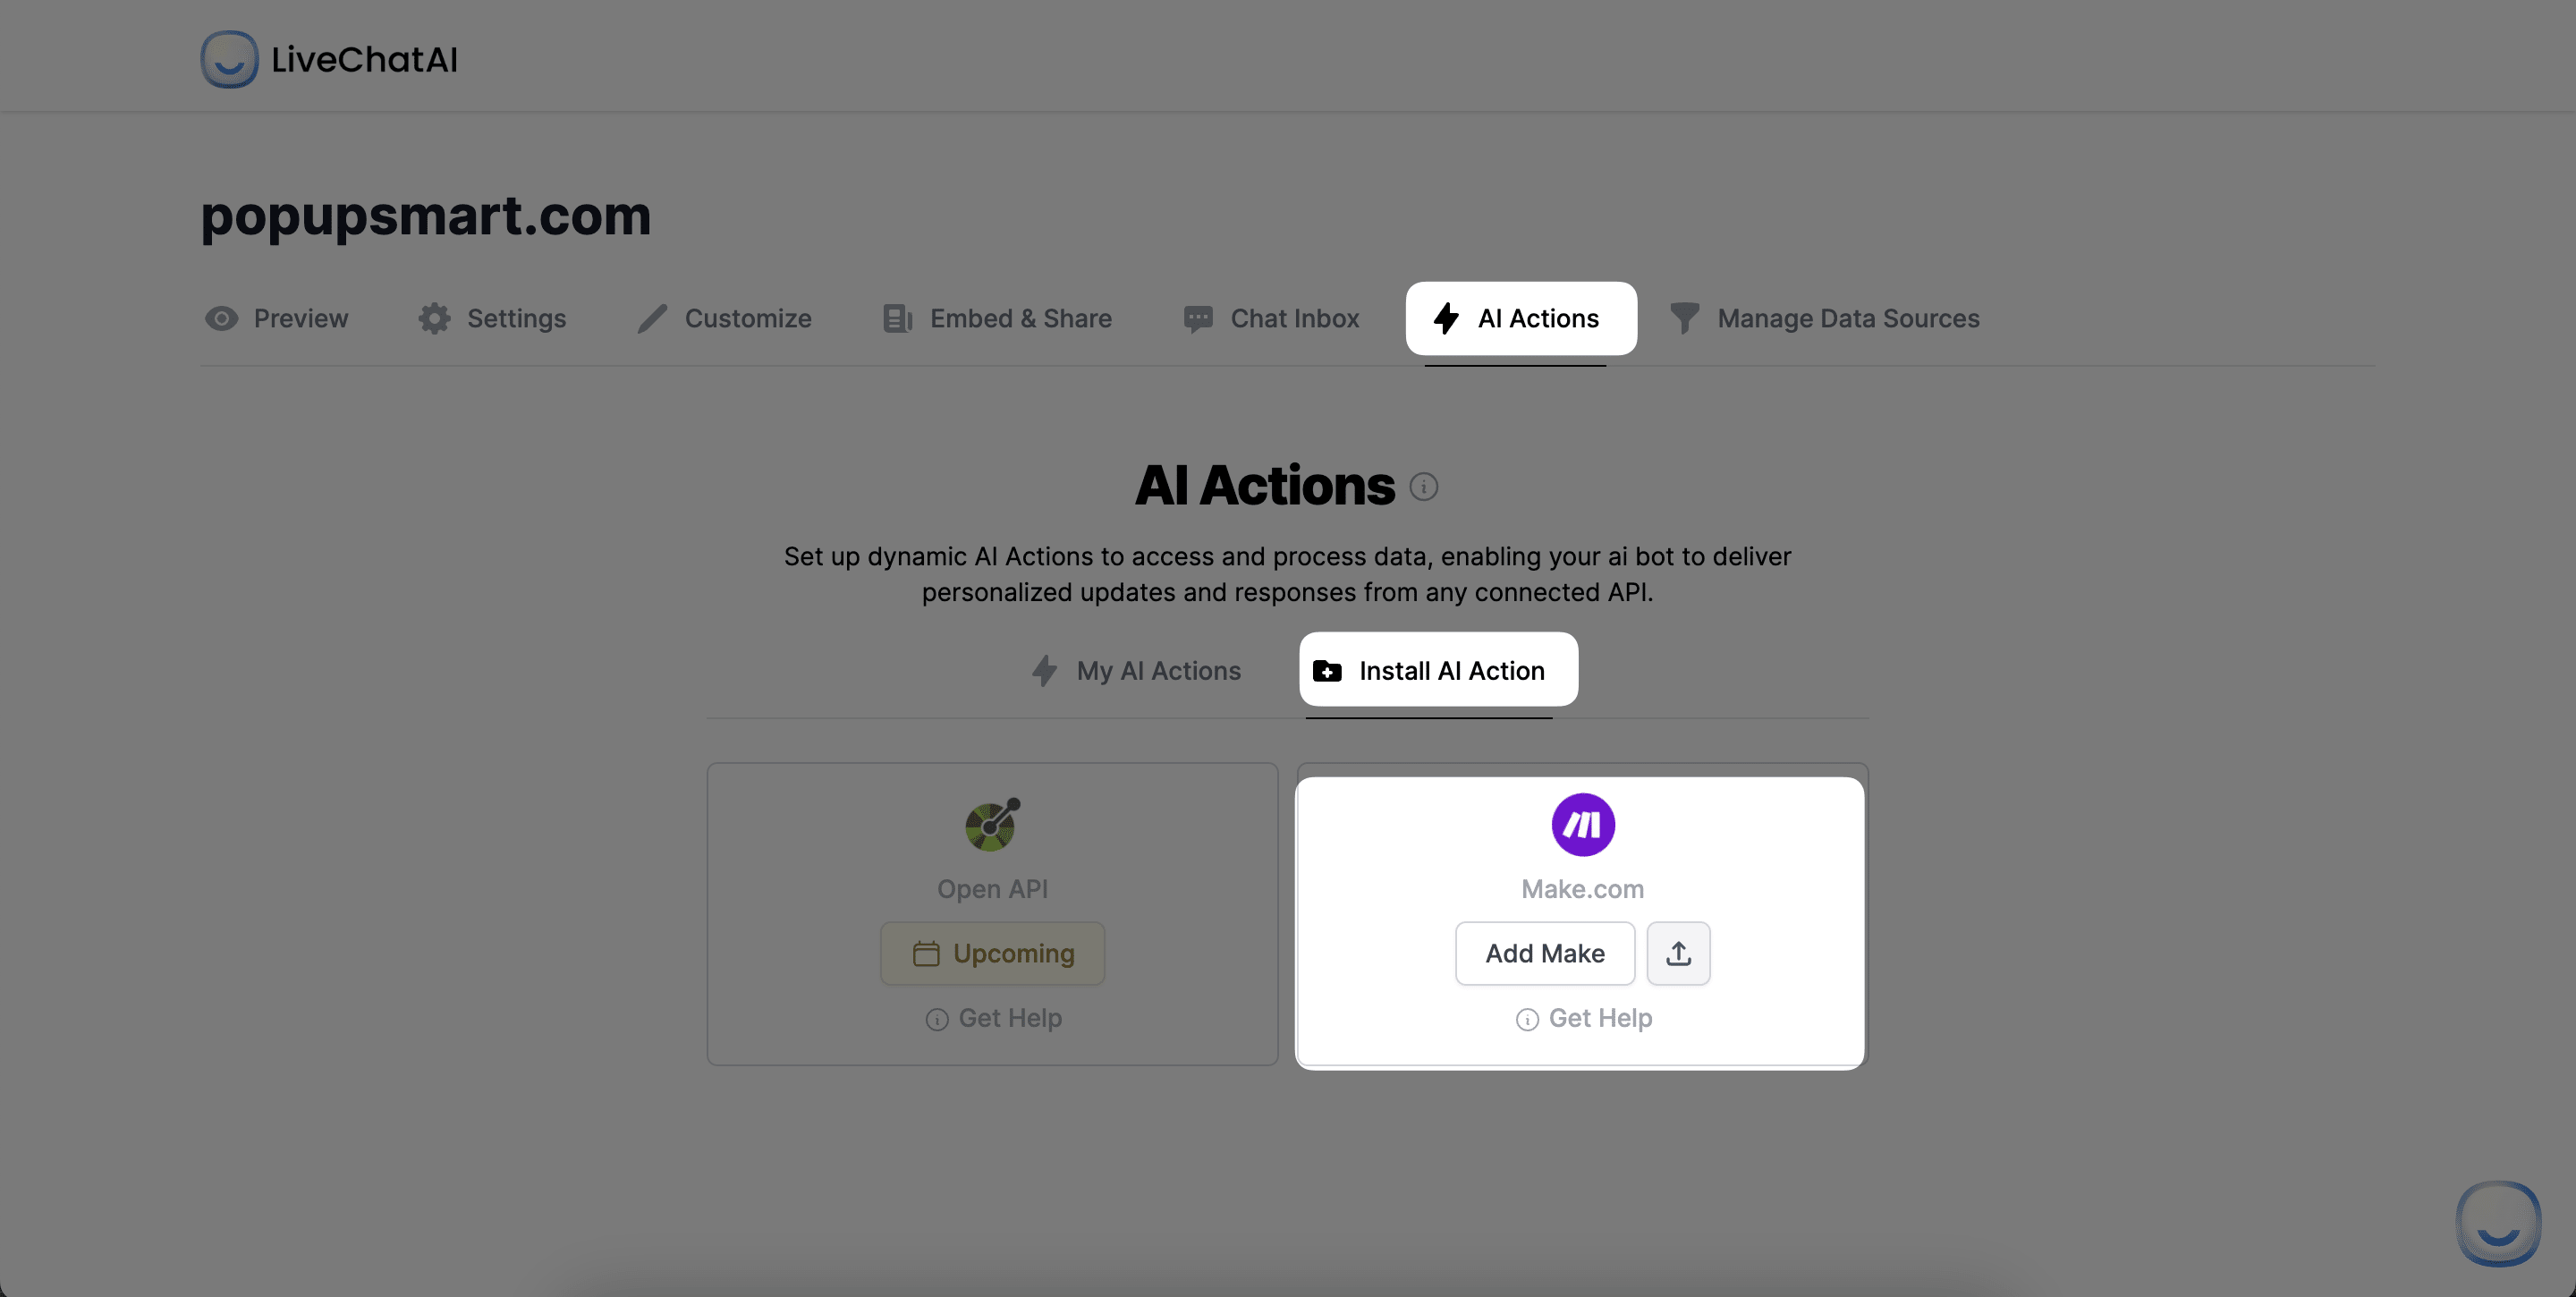 Make.com integration Section below Install AI Action in LiveChatAI AI Actions tab 